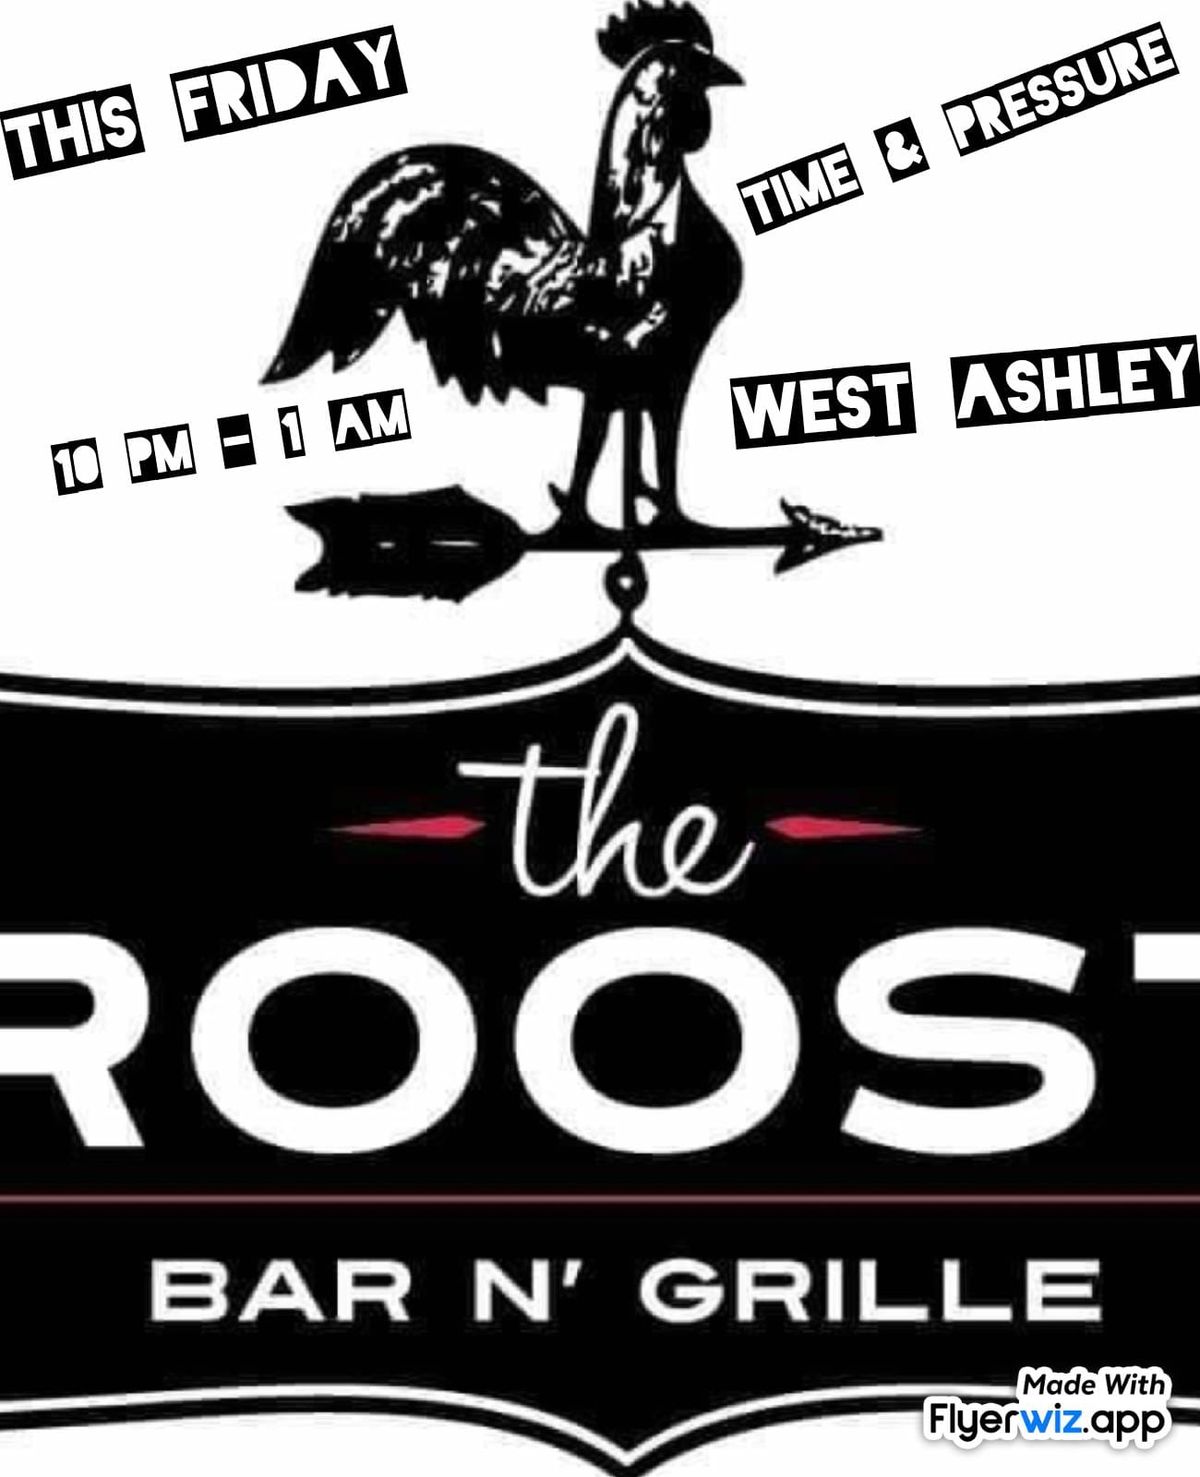 Time & Pressure at The Roost